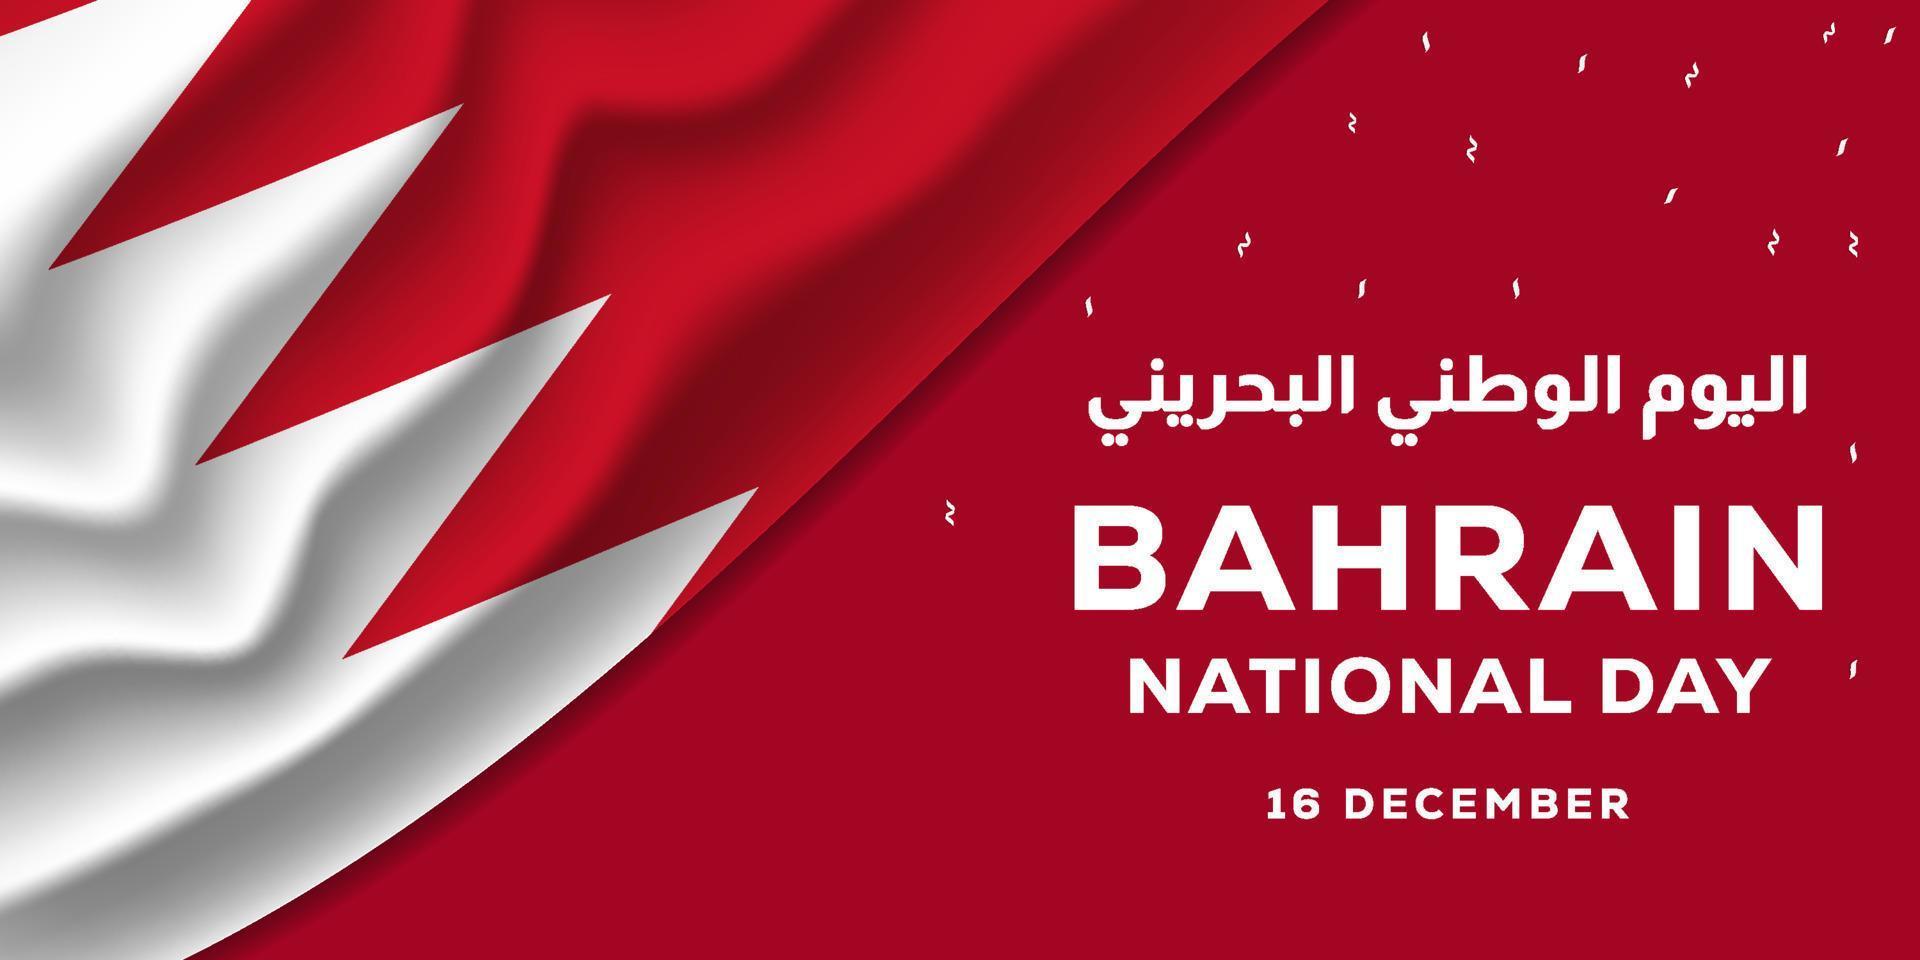 bahrain national day banner with realistic bahrain flag. arabic translation is bahrain national day vector